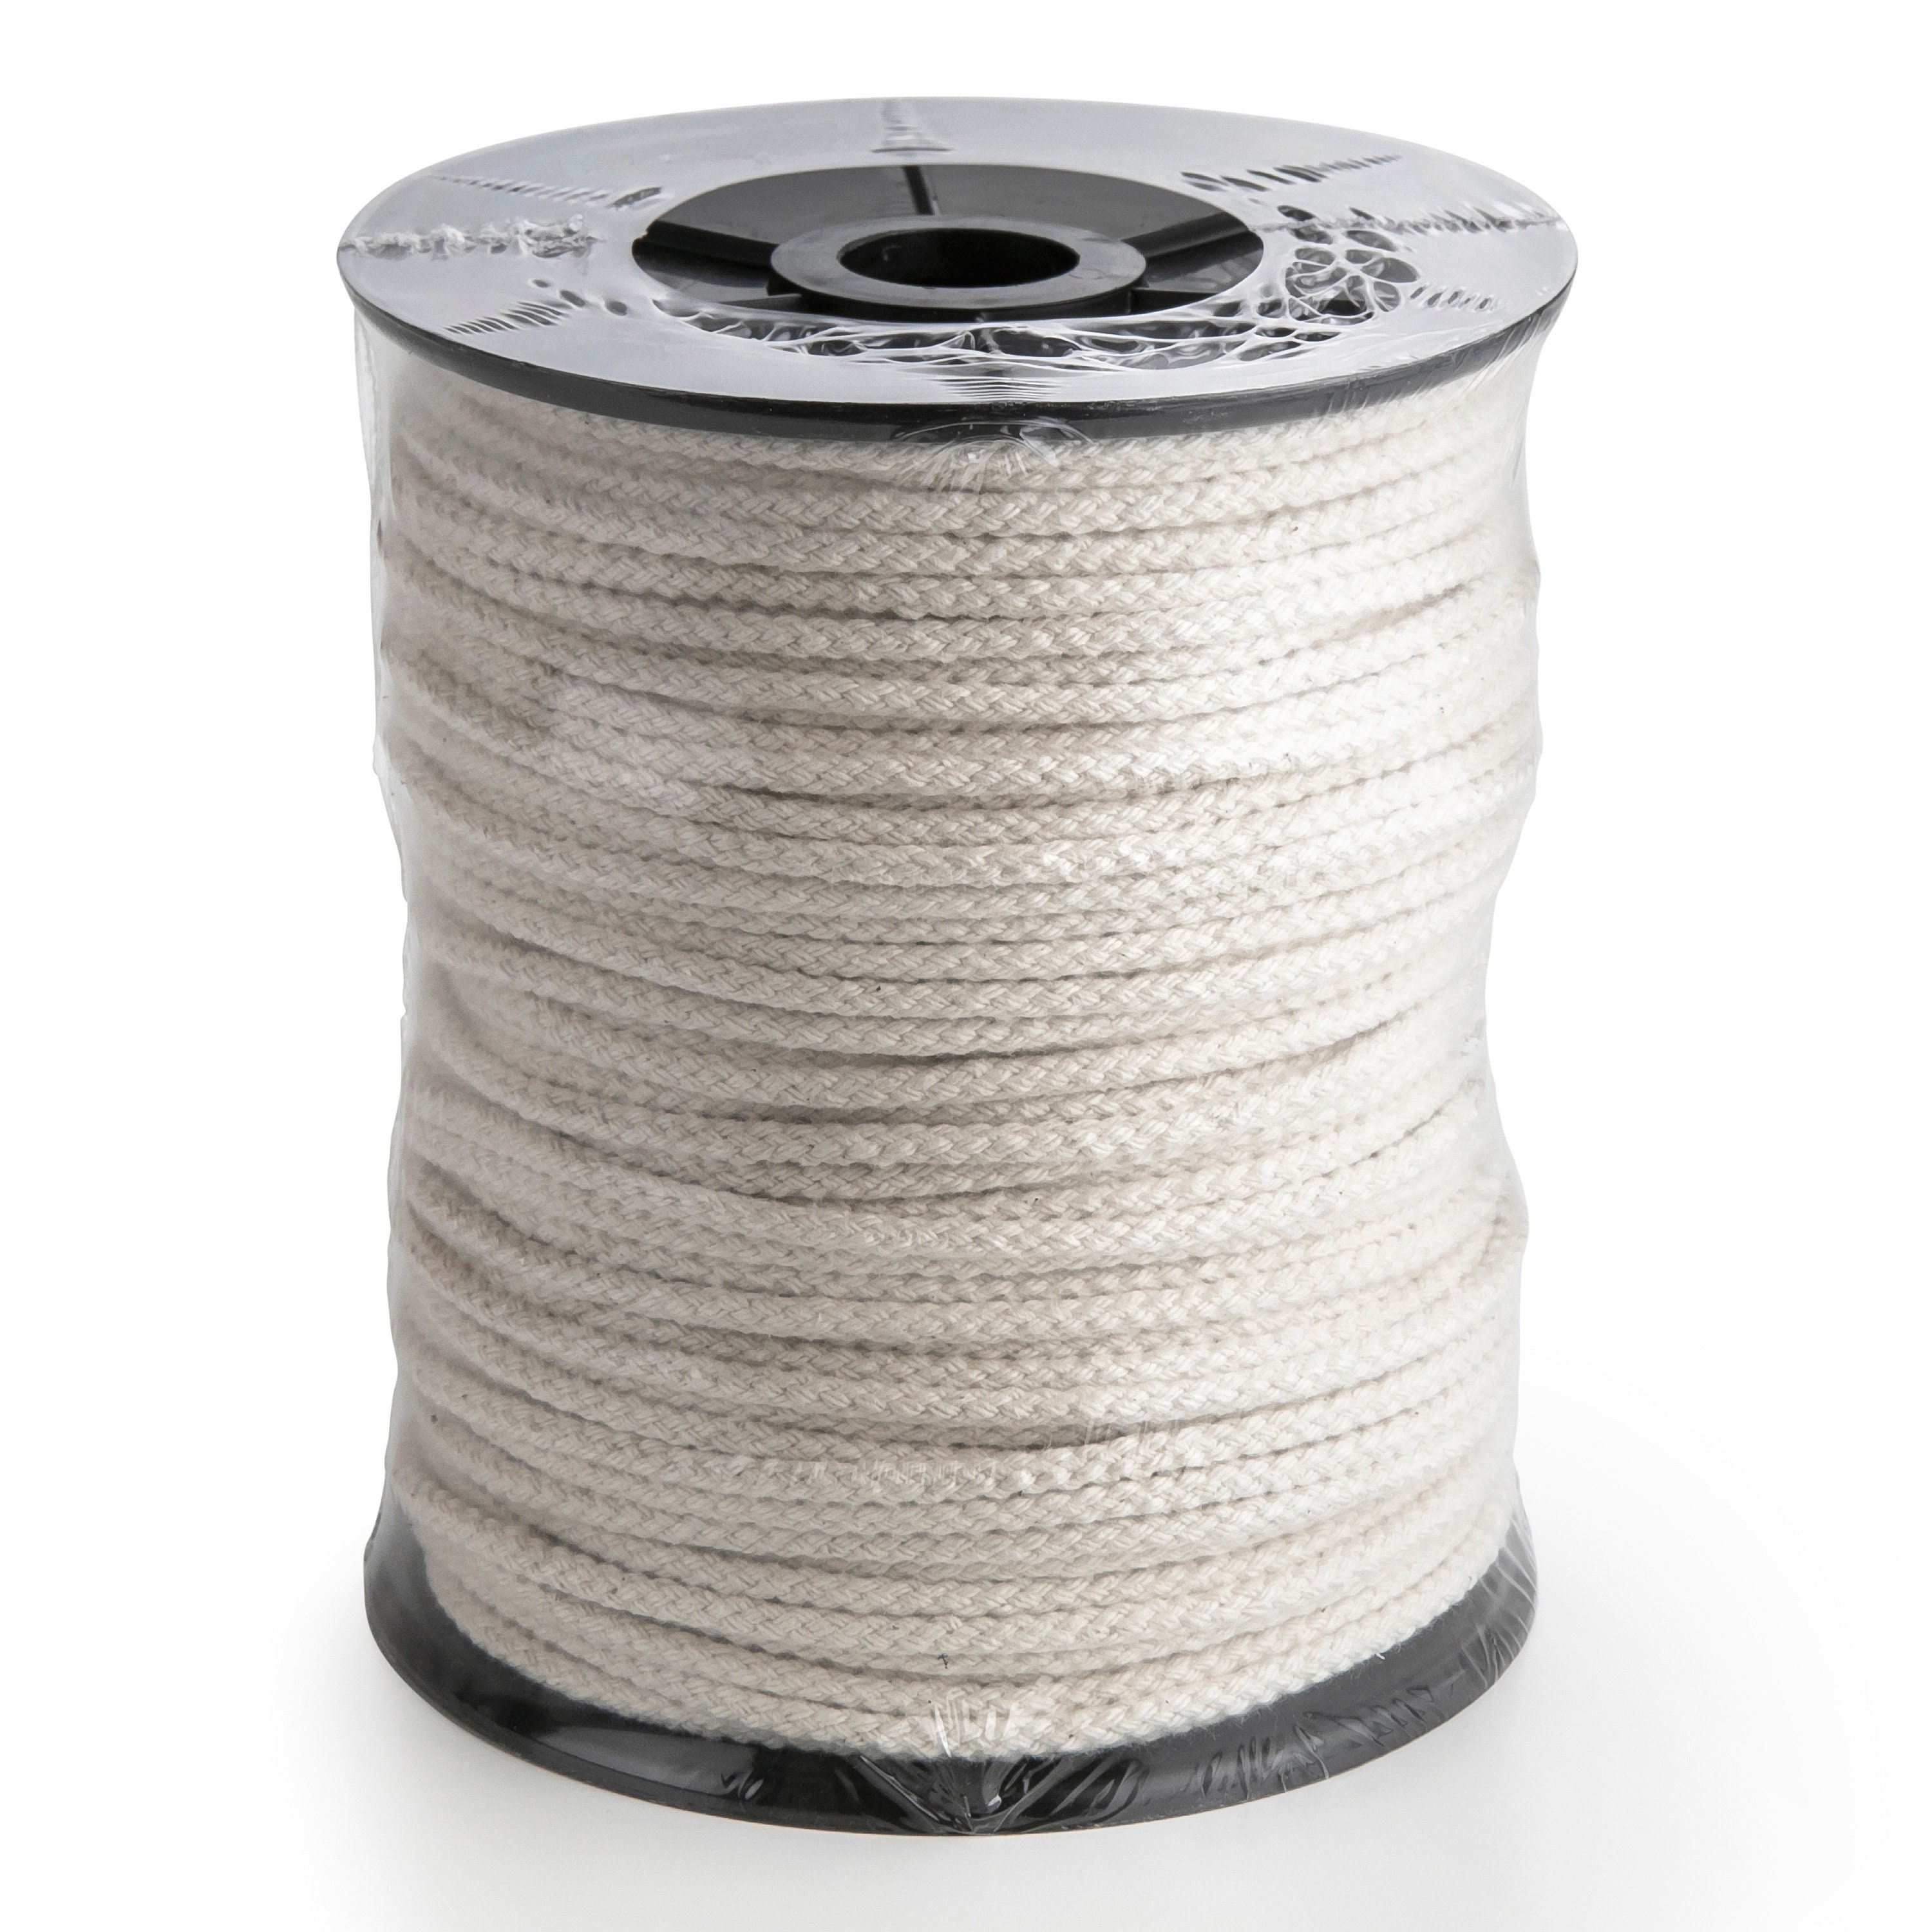 Macrame Cord, 2mm X 110 Yd (about 100m) 100% Natural Cotton Soft